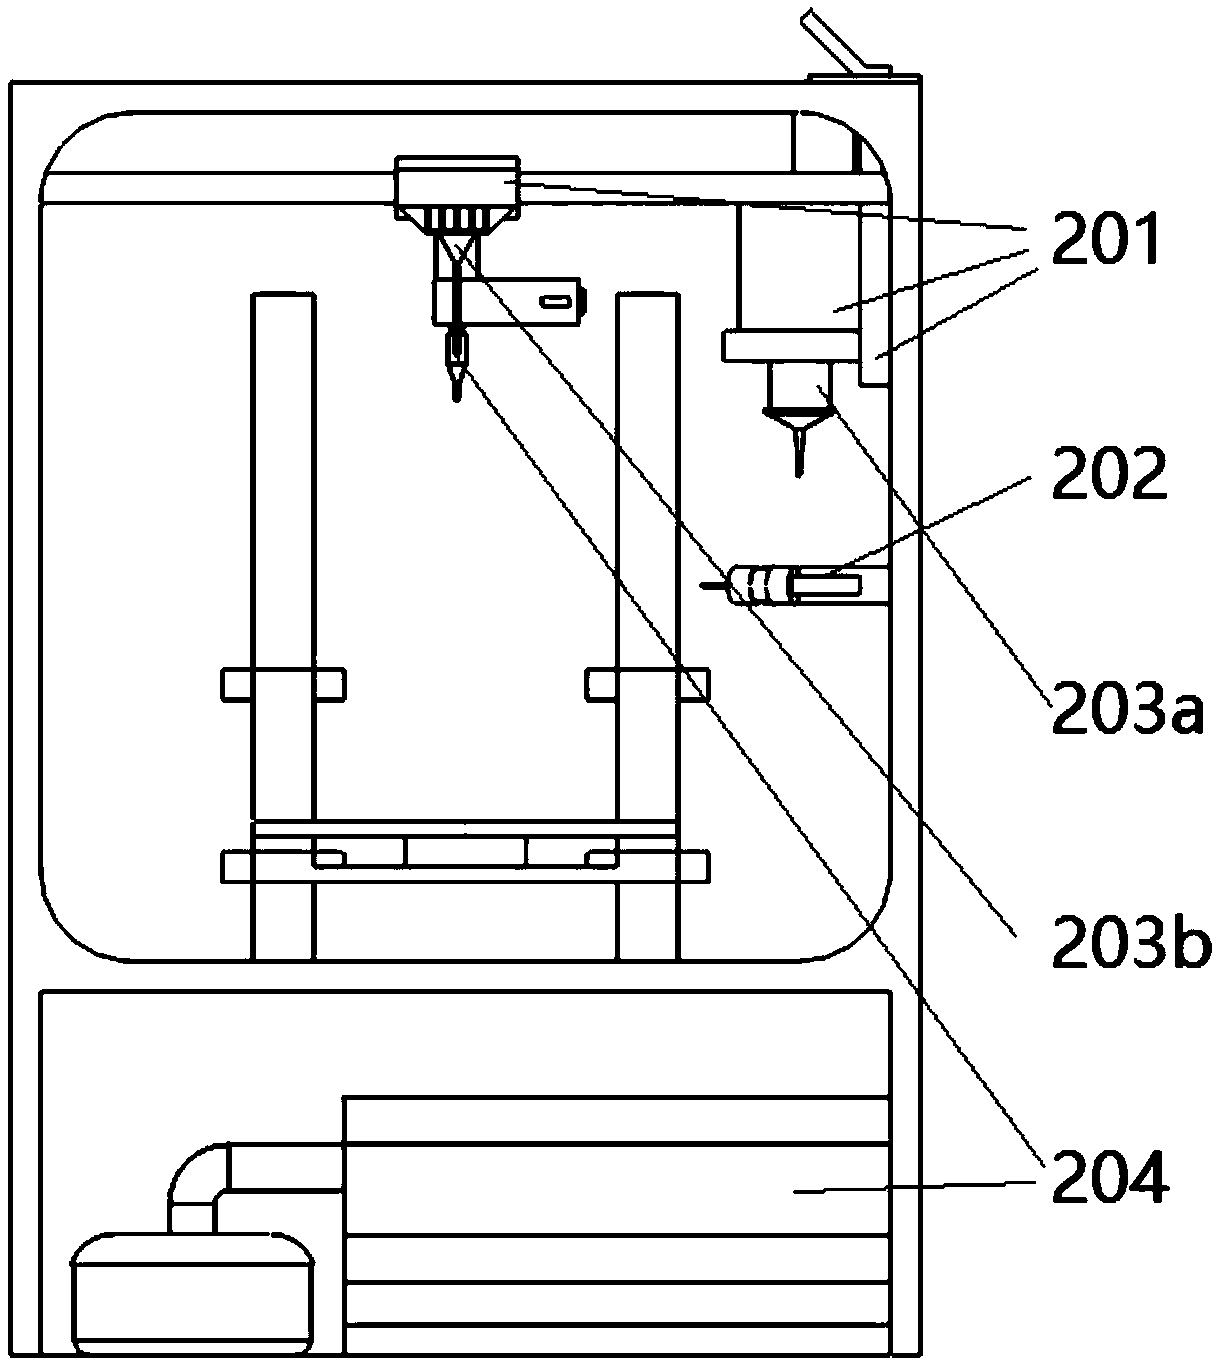 A 3D printing device and method for a tissue engineering scaffold